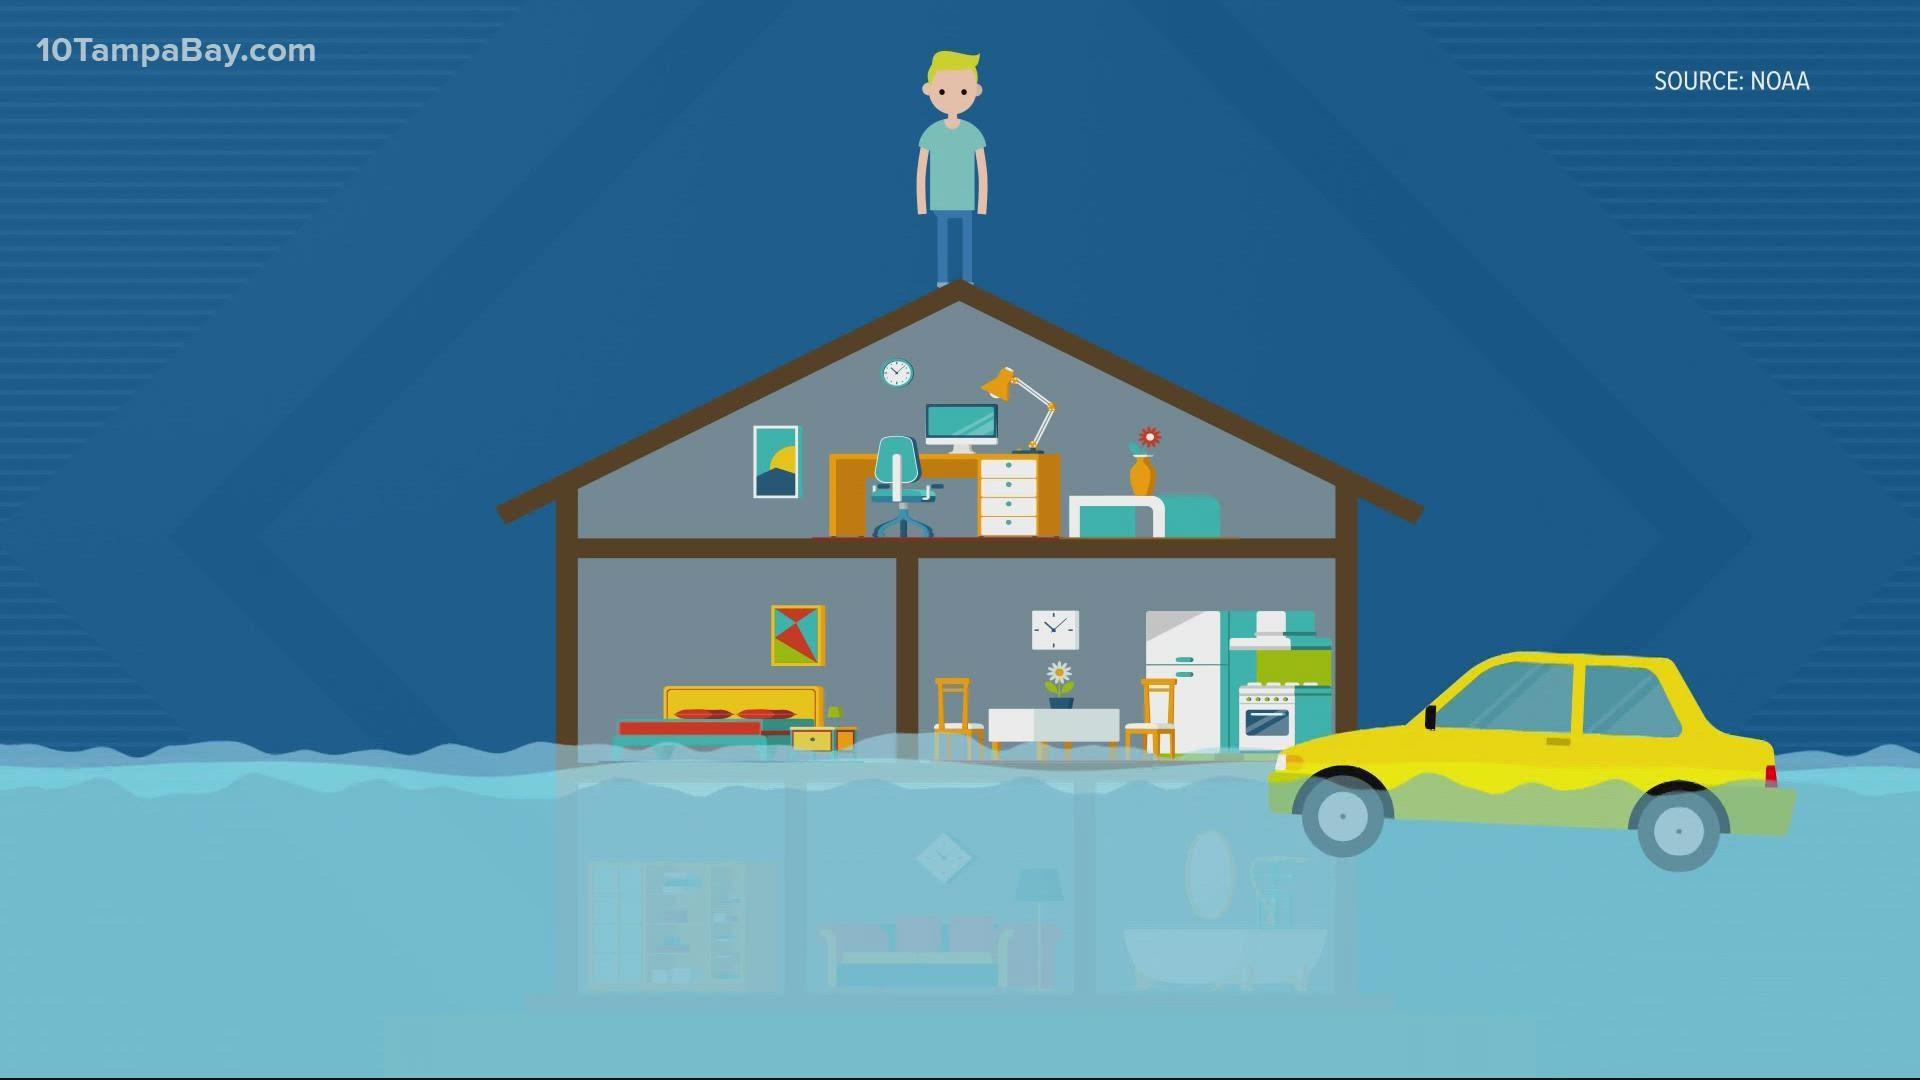 Dealing with flooding is part of living in Florida. Here are some tips to help you stay prepared.